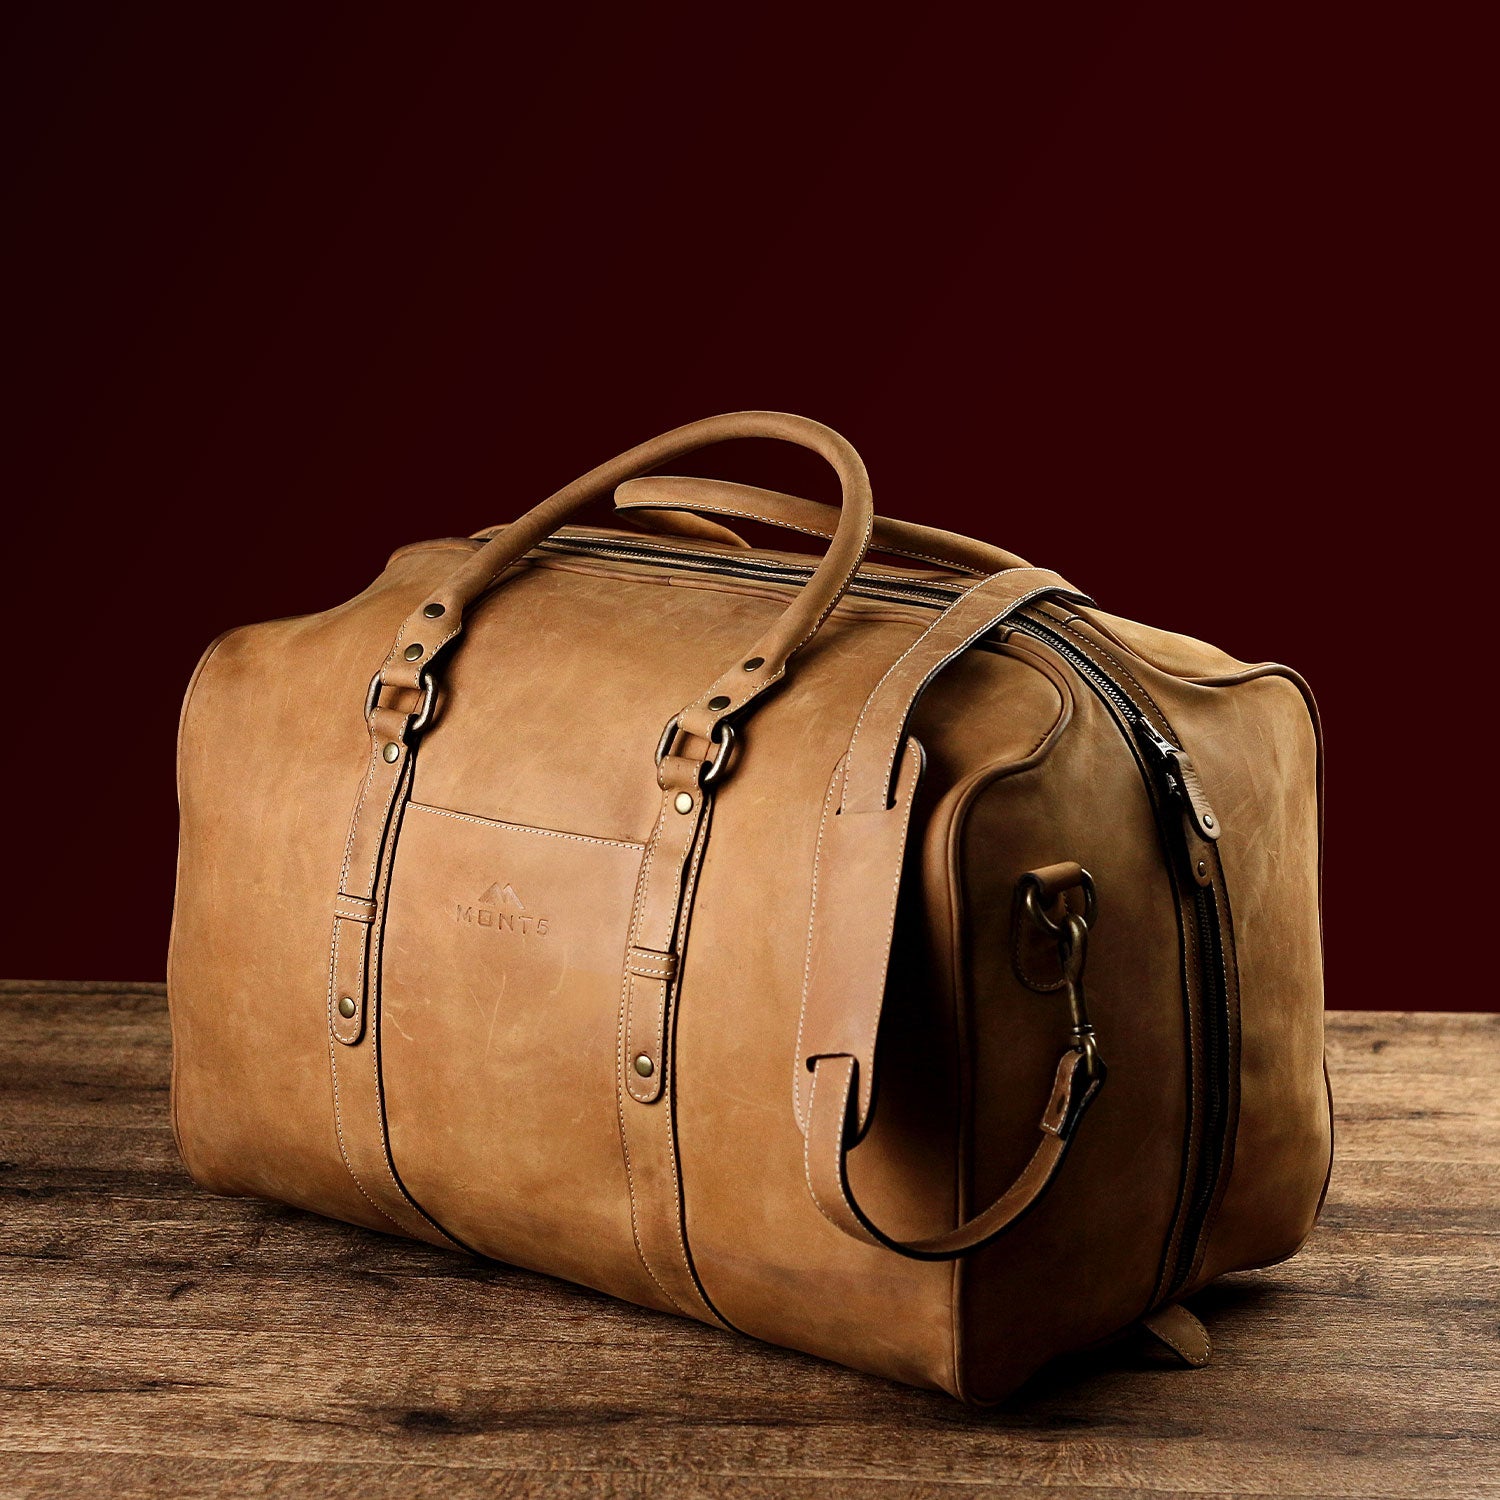 Distressed Leather Duffel Bag / Travel Bag- The Vintage - Ranch